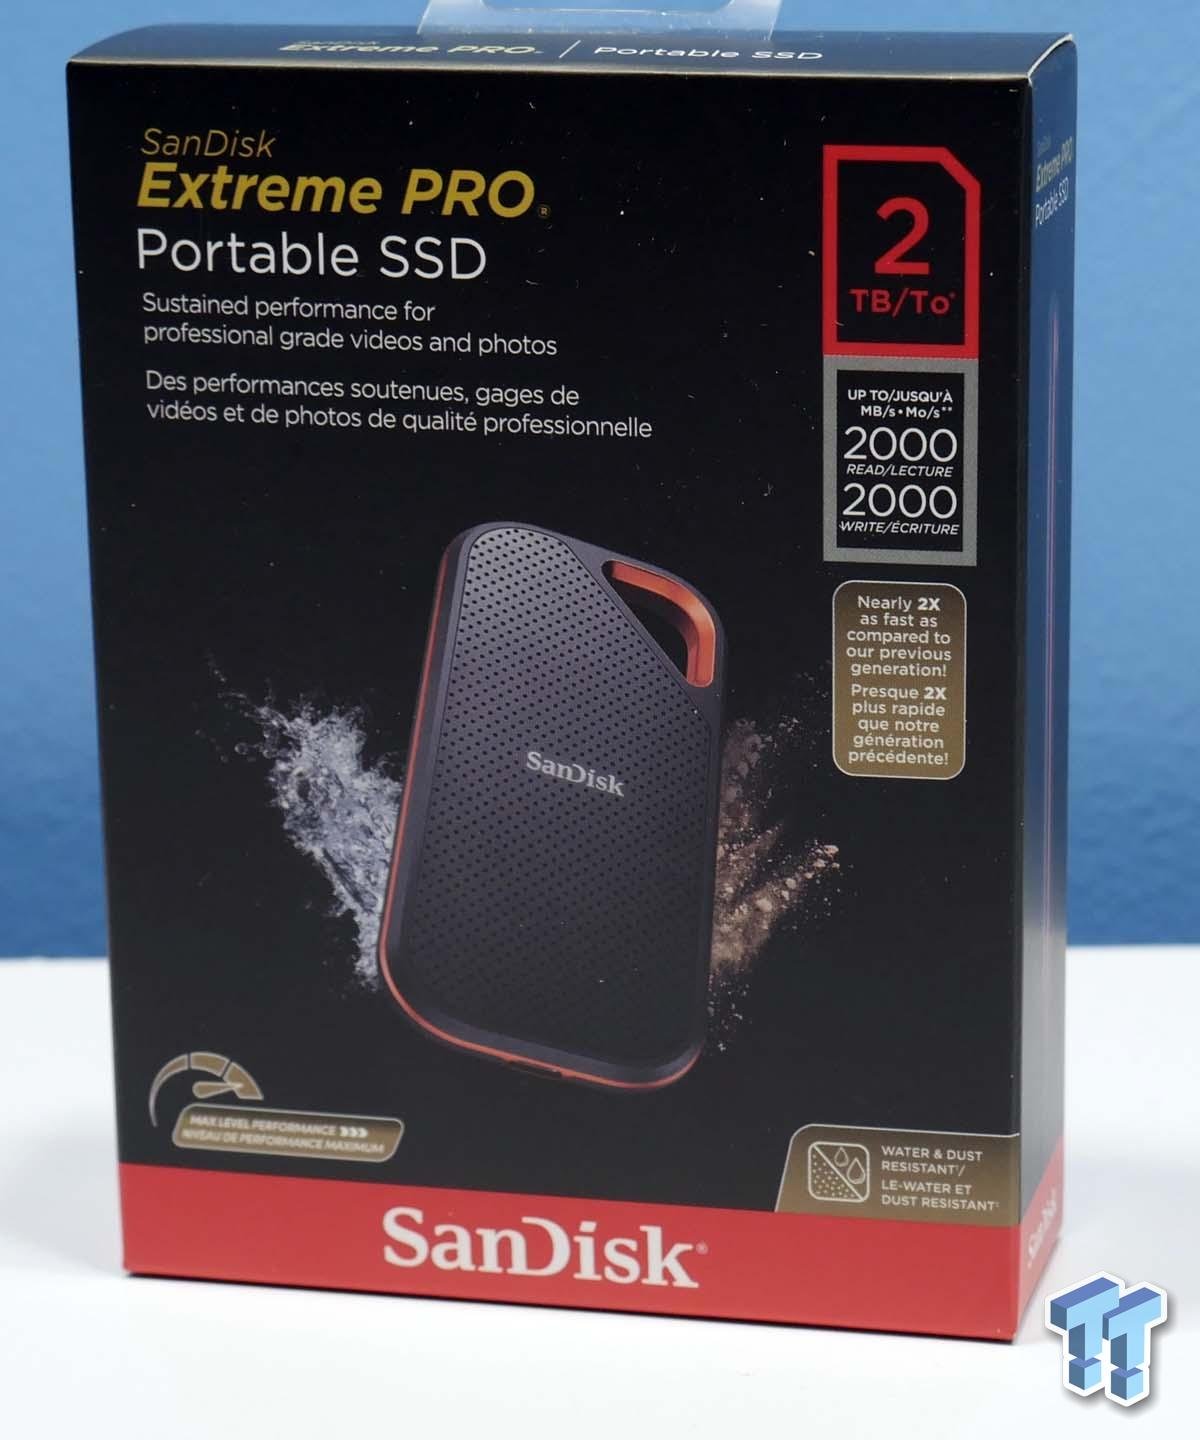 SanDisk Extreme Pro 2TB Portable SSD Review